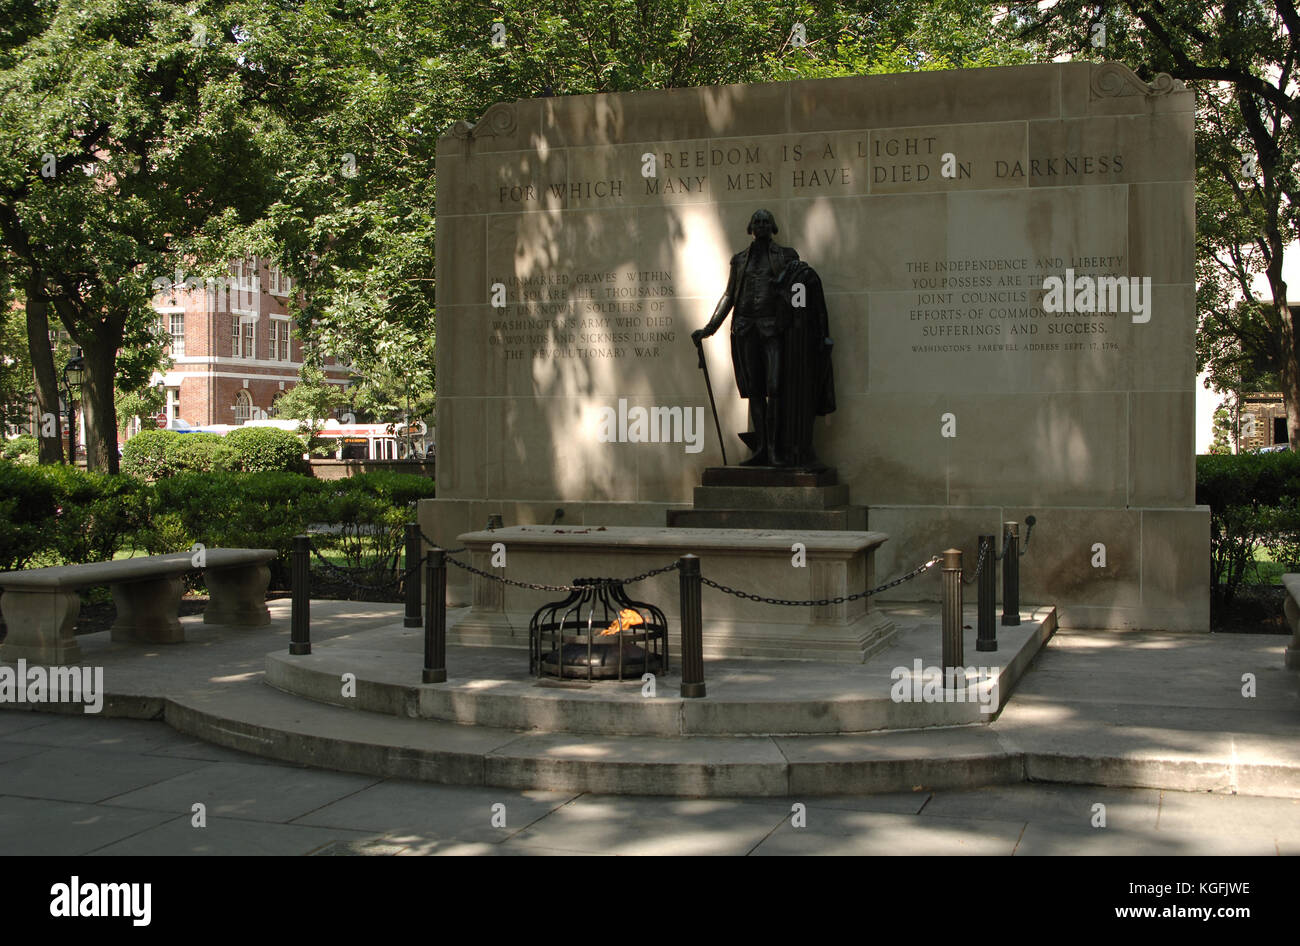 Unites States. Pennsylvania. Philadelphia. Tomb of the Unknown Revolutionary War Soldier, 1957. By G. Edwing Brumbaugh (1890-1983) and statue of George Washington by Jean Antoine Houdon (1741-1828). Stock Photo